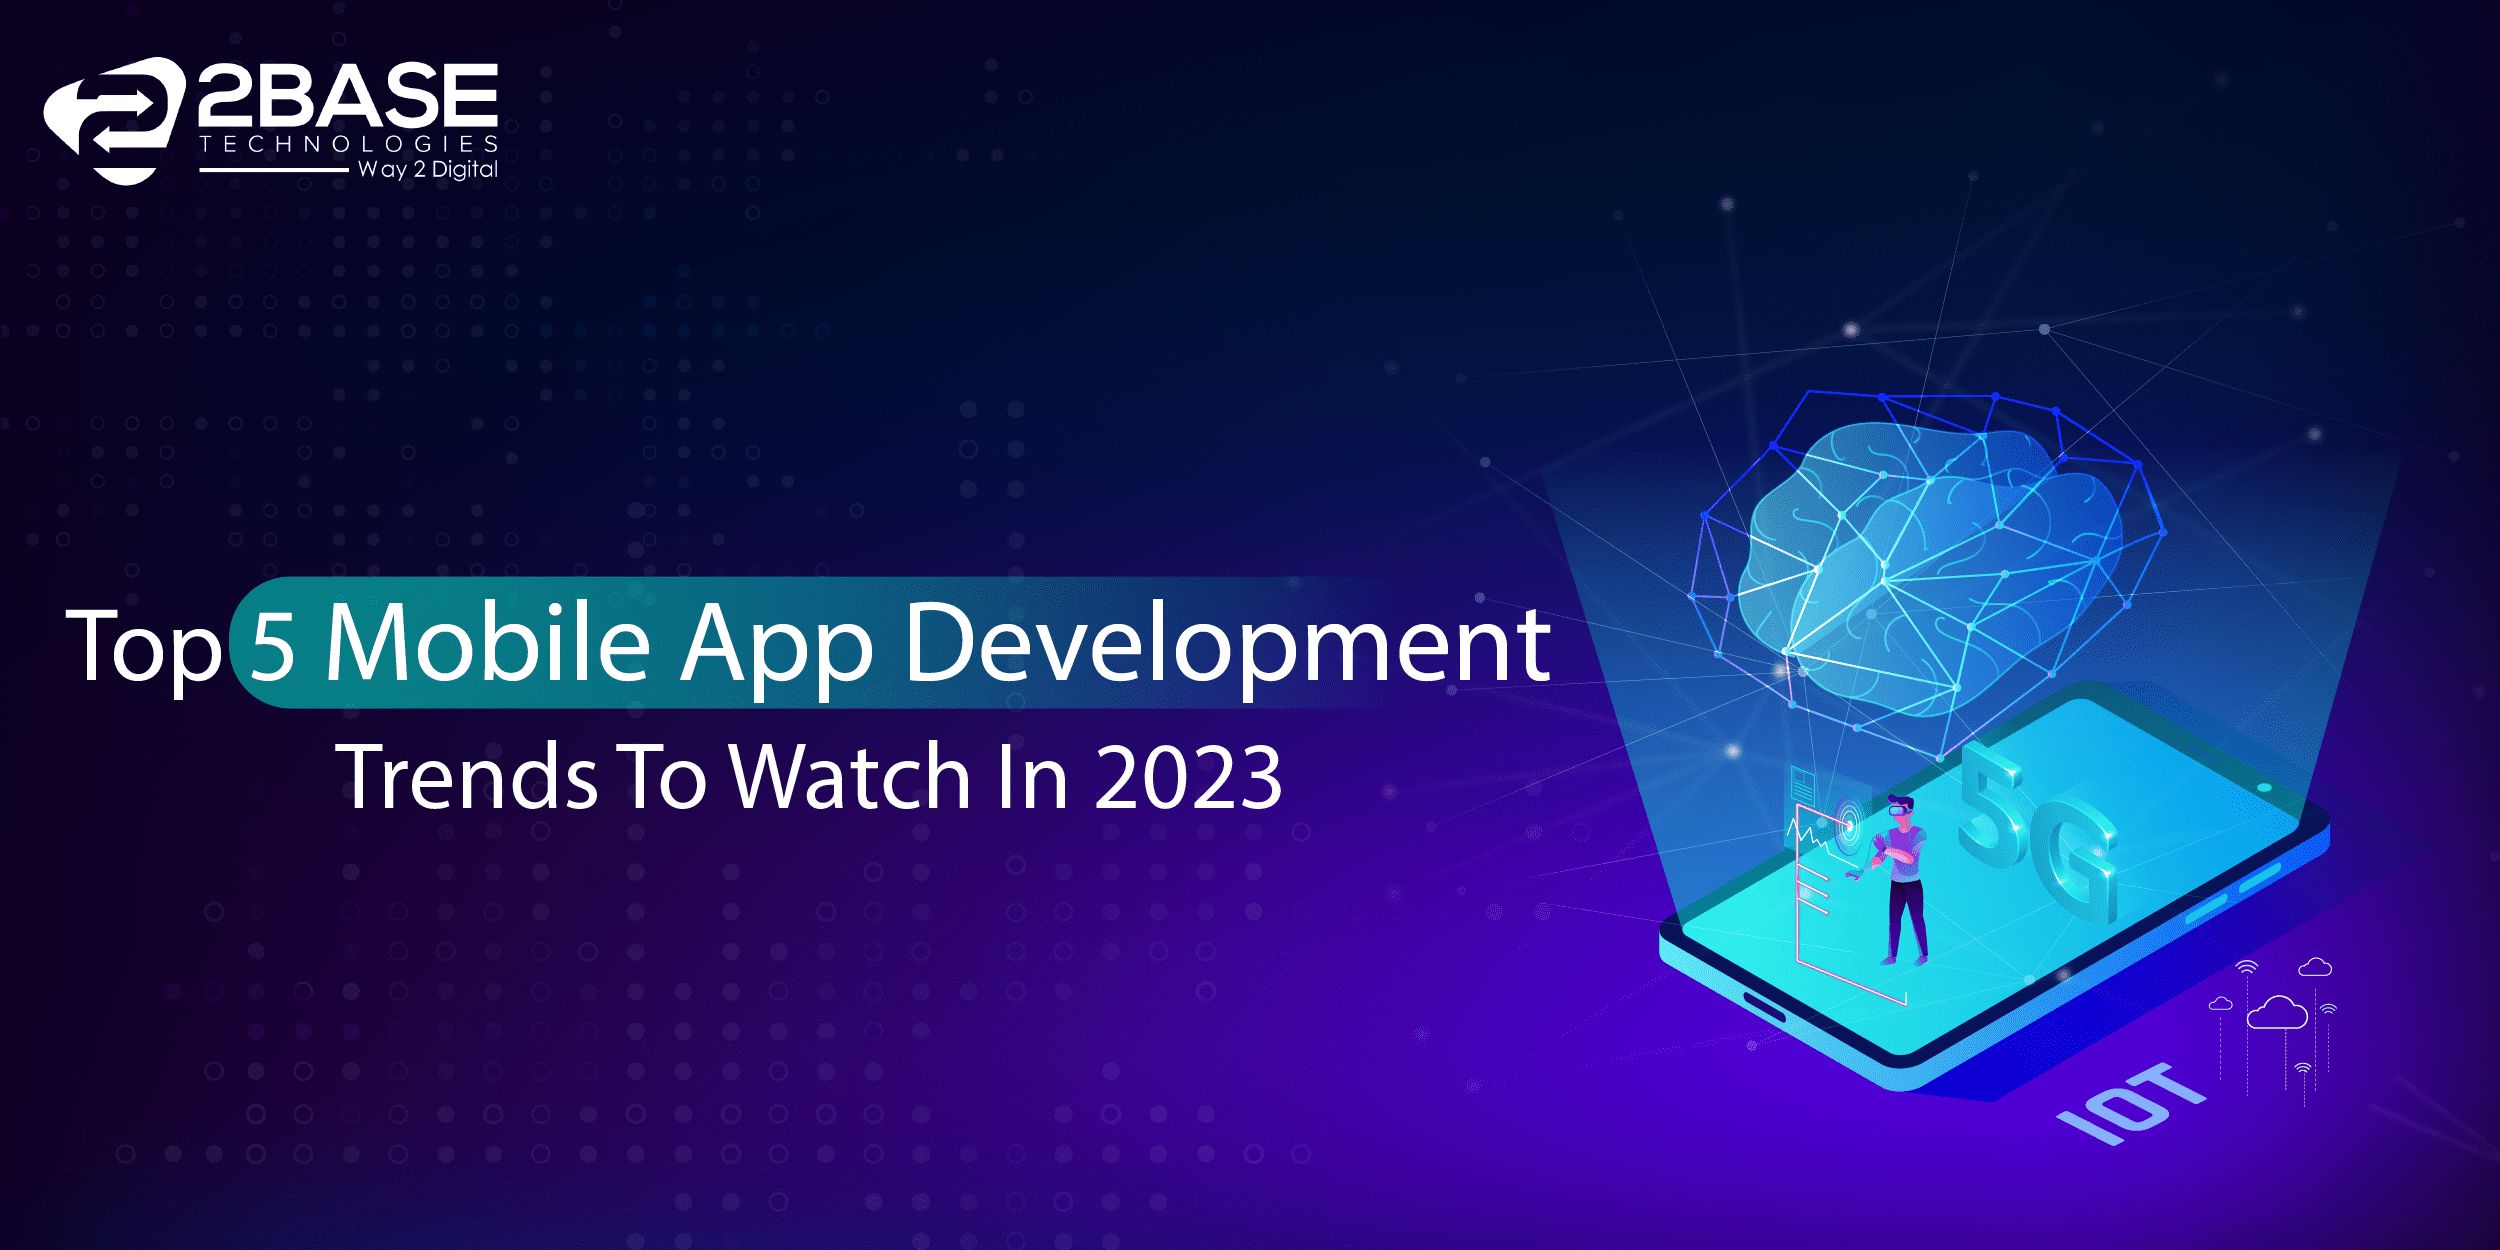 Top 5 Mobile App Development Trends To Watch on 2023